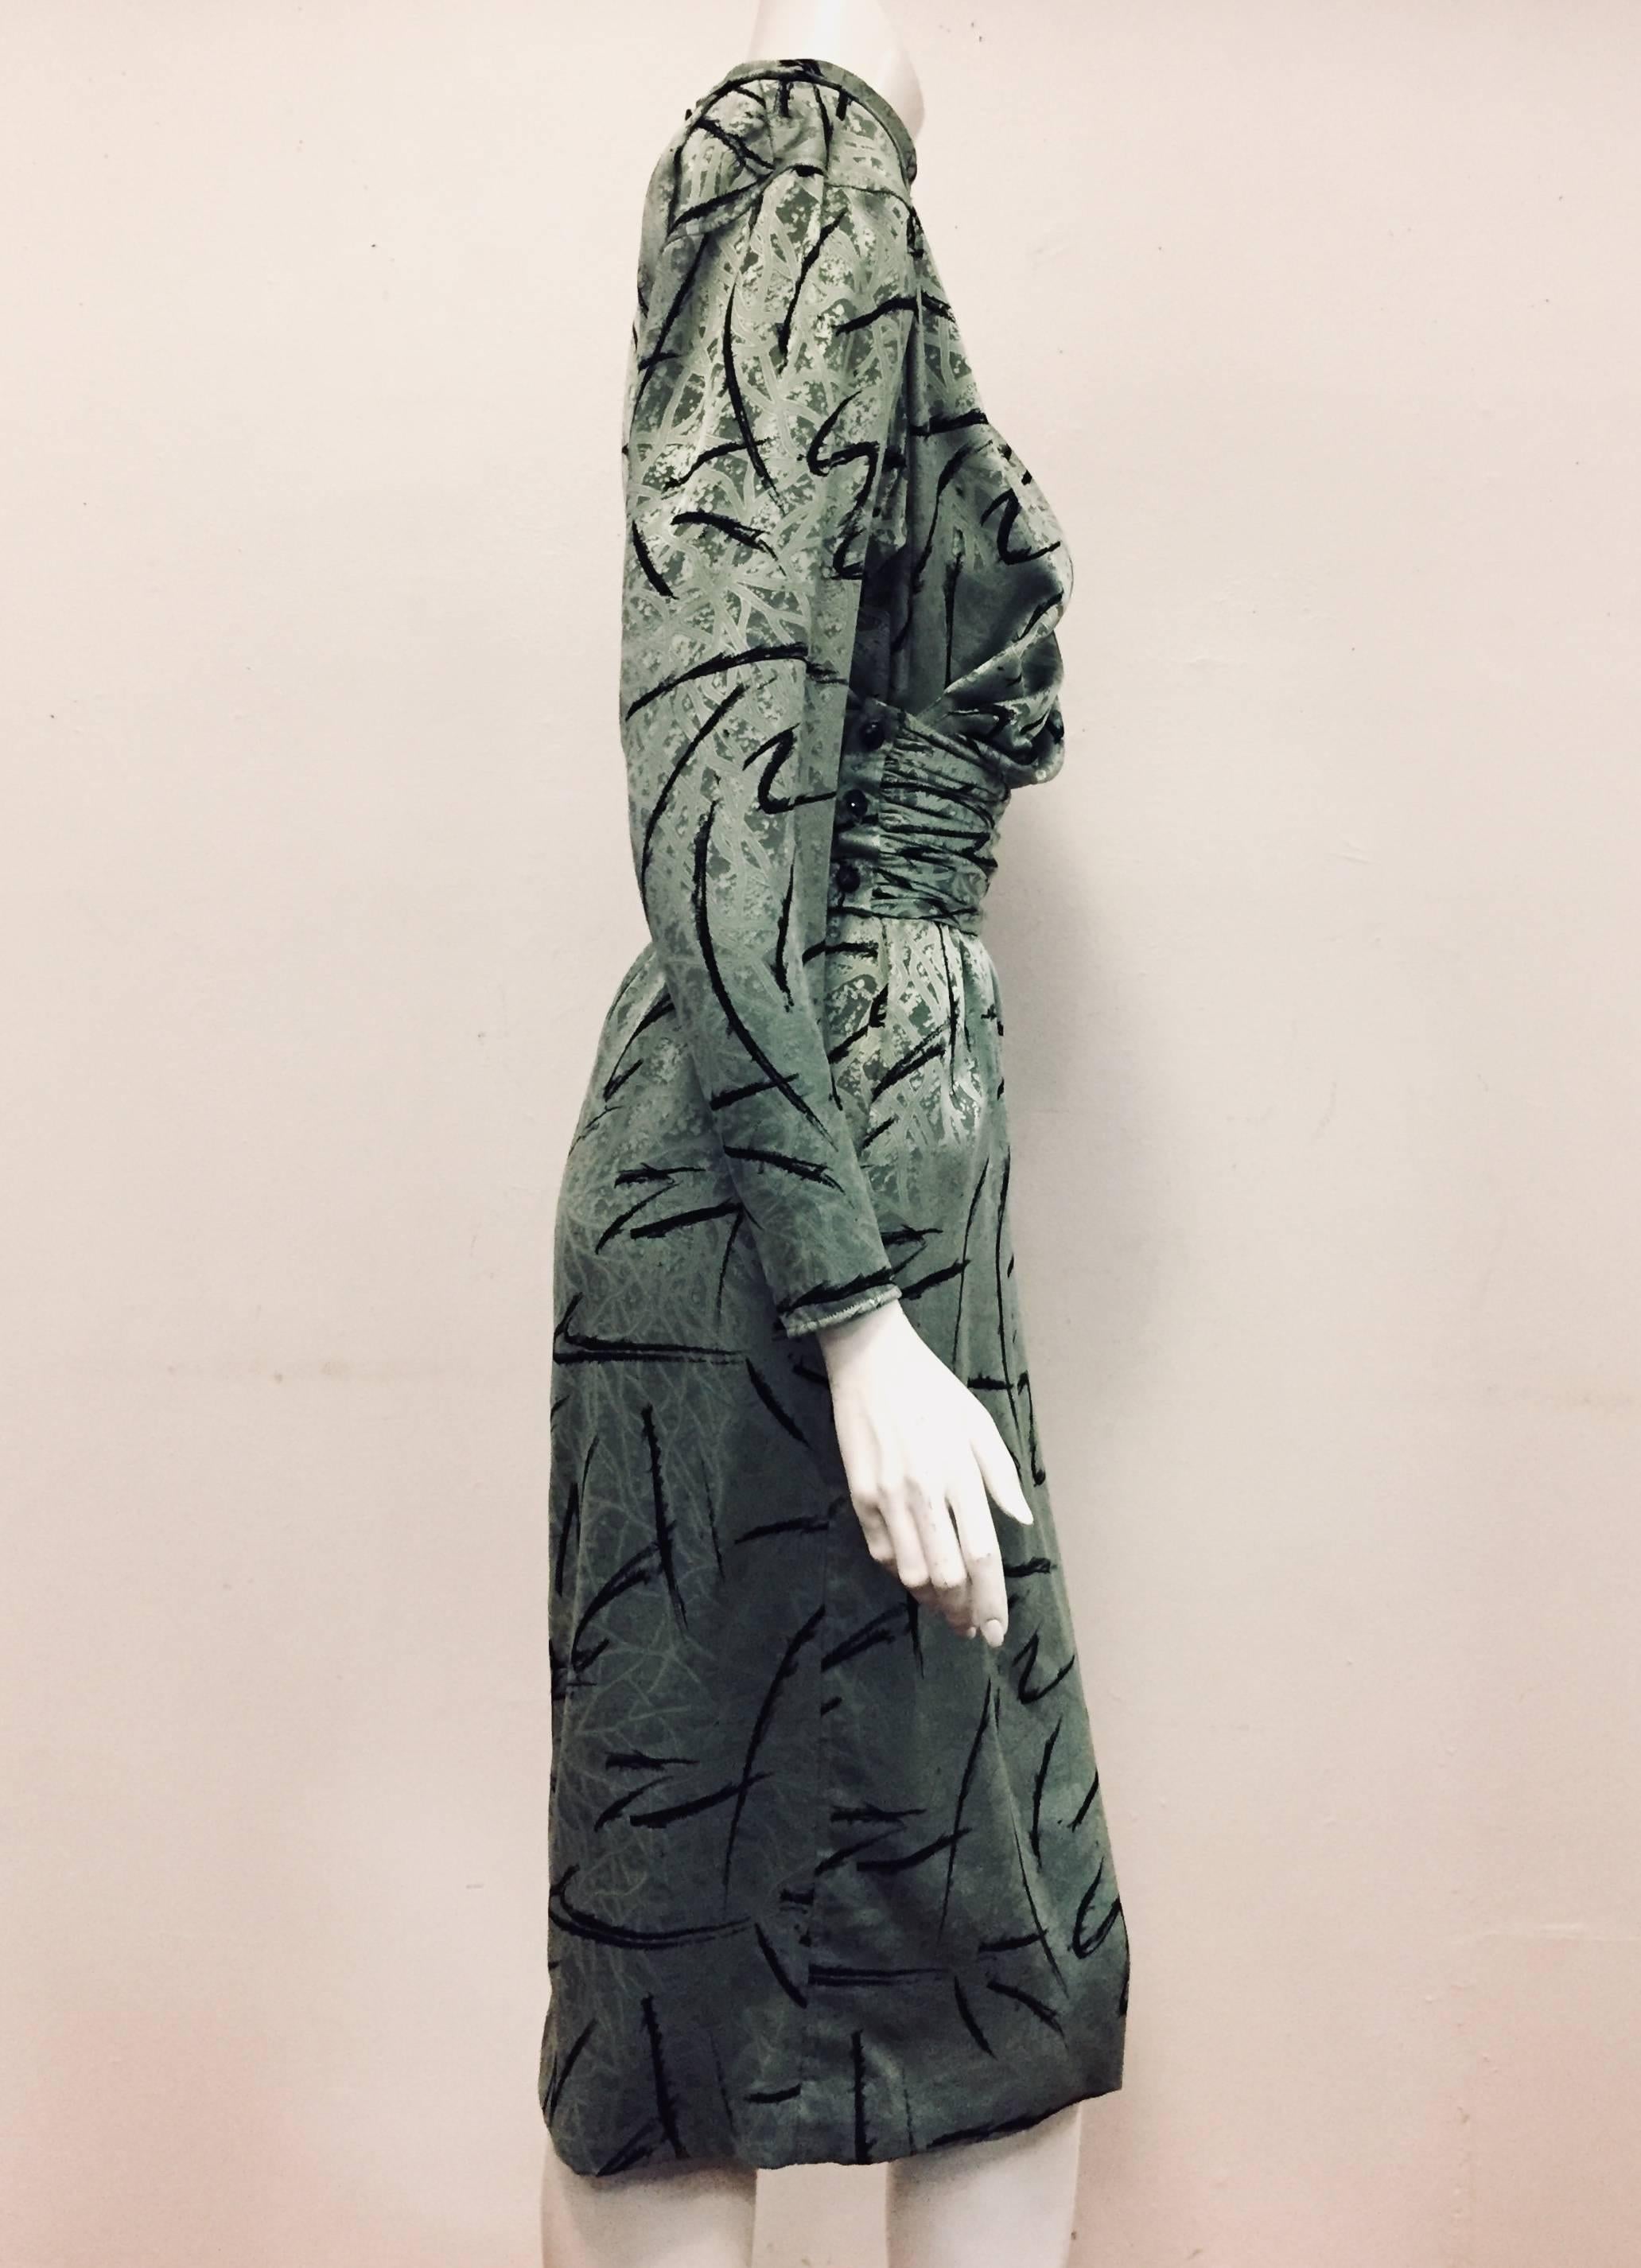 Emanuel Ungaro abstract print green jacquard long sleeve dress with same fabric gathered belt is traditional and elegant.  The turtle neck gathered collar has 3 buttons for closure at neckline with same 7 additional buttons used for back closure.  